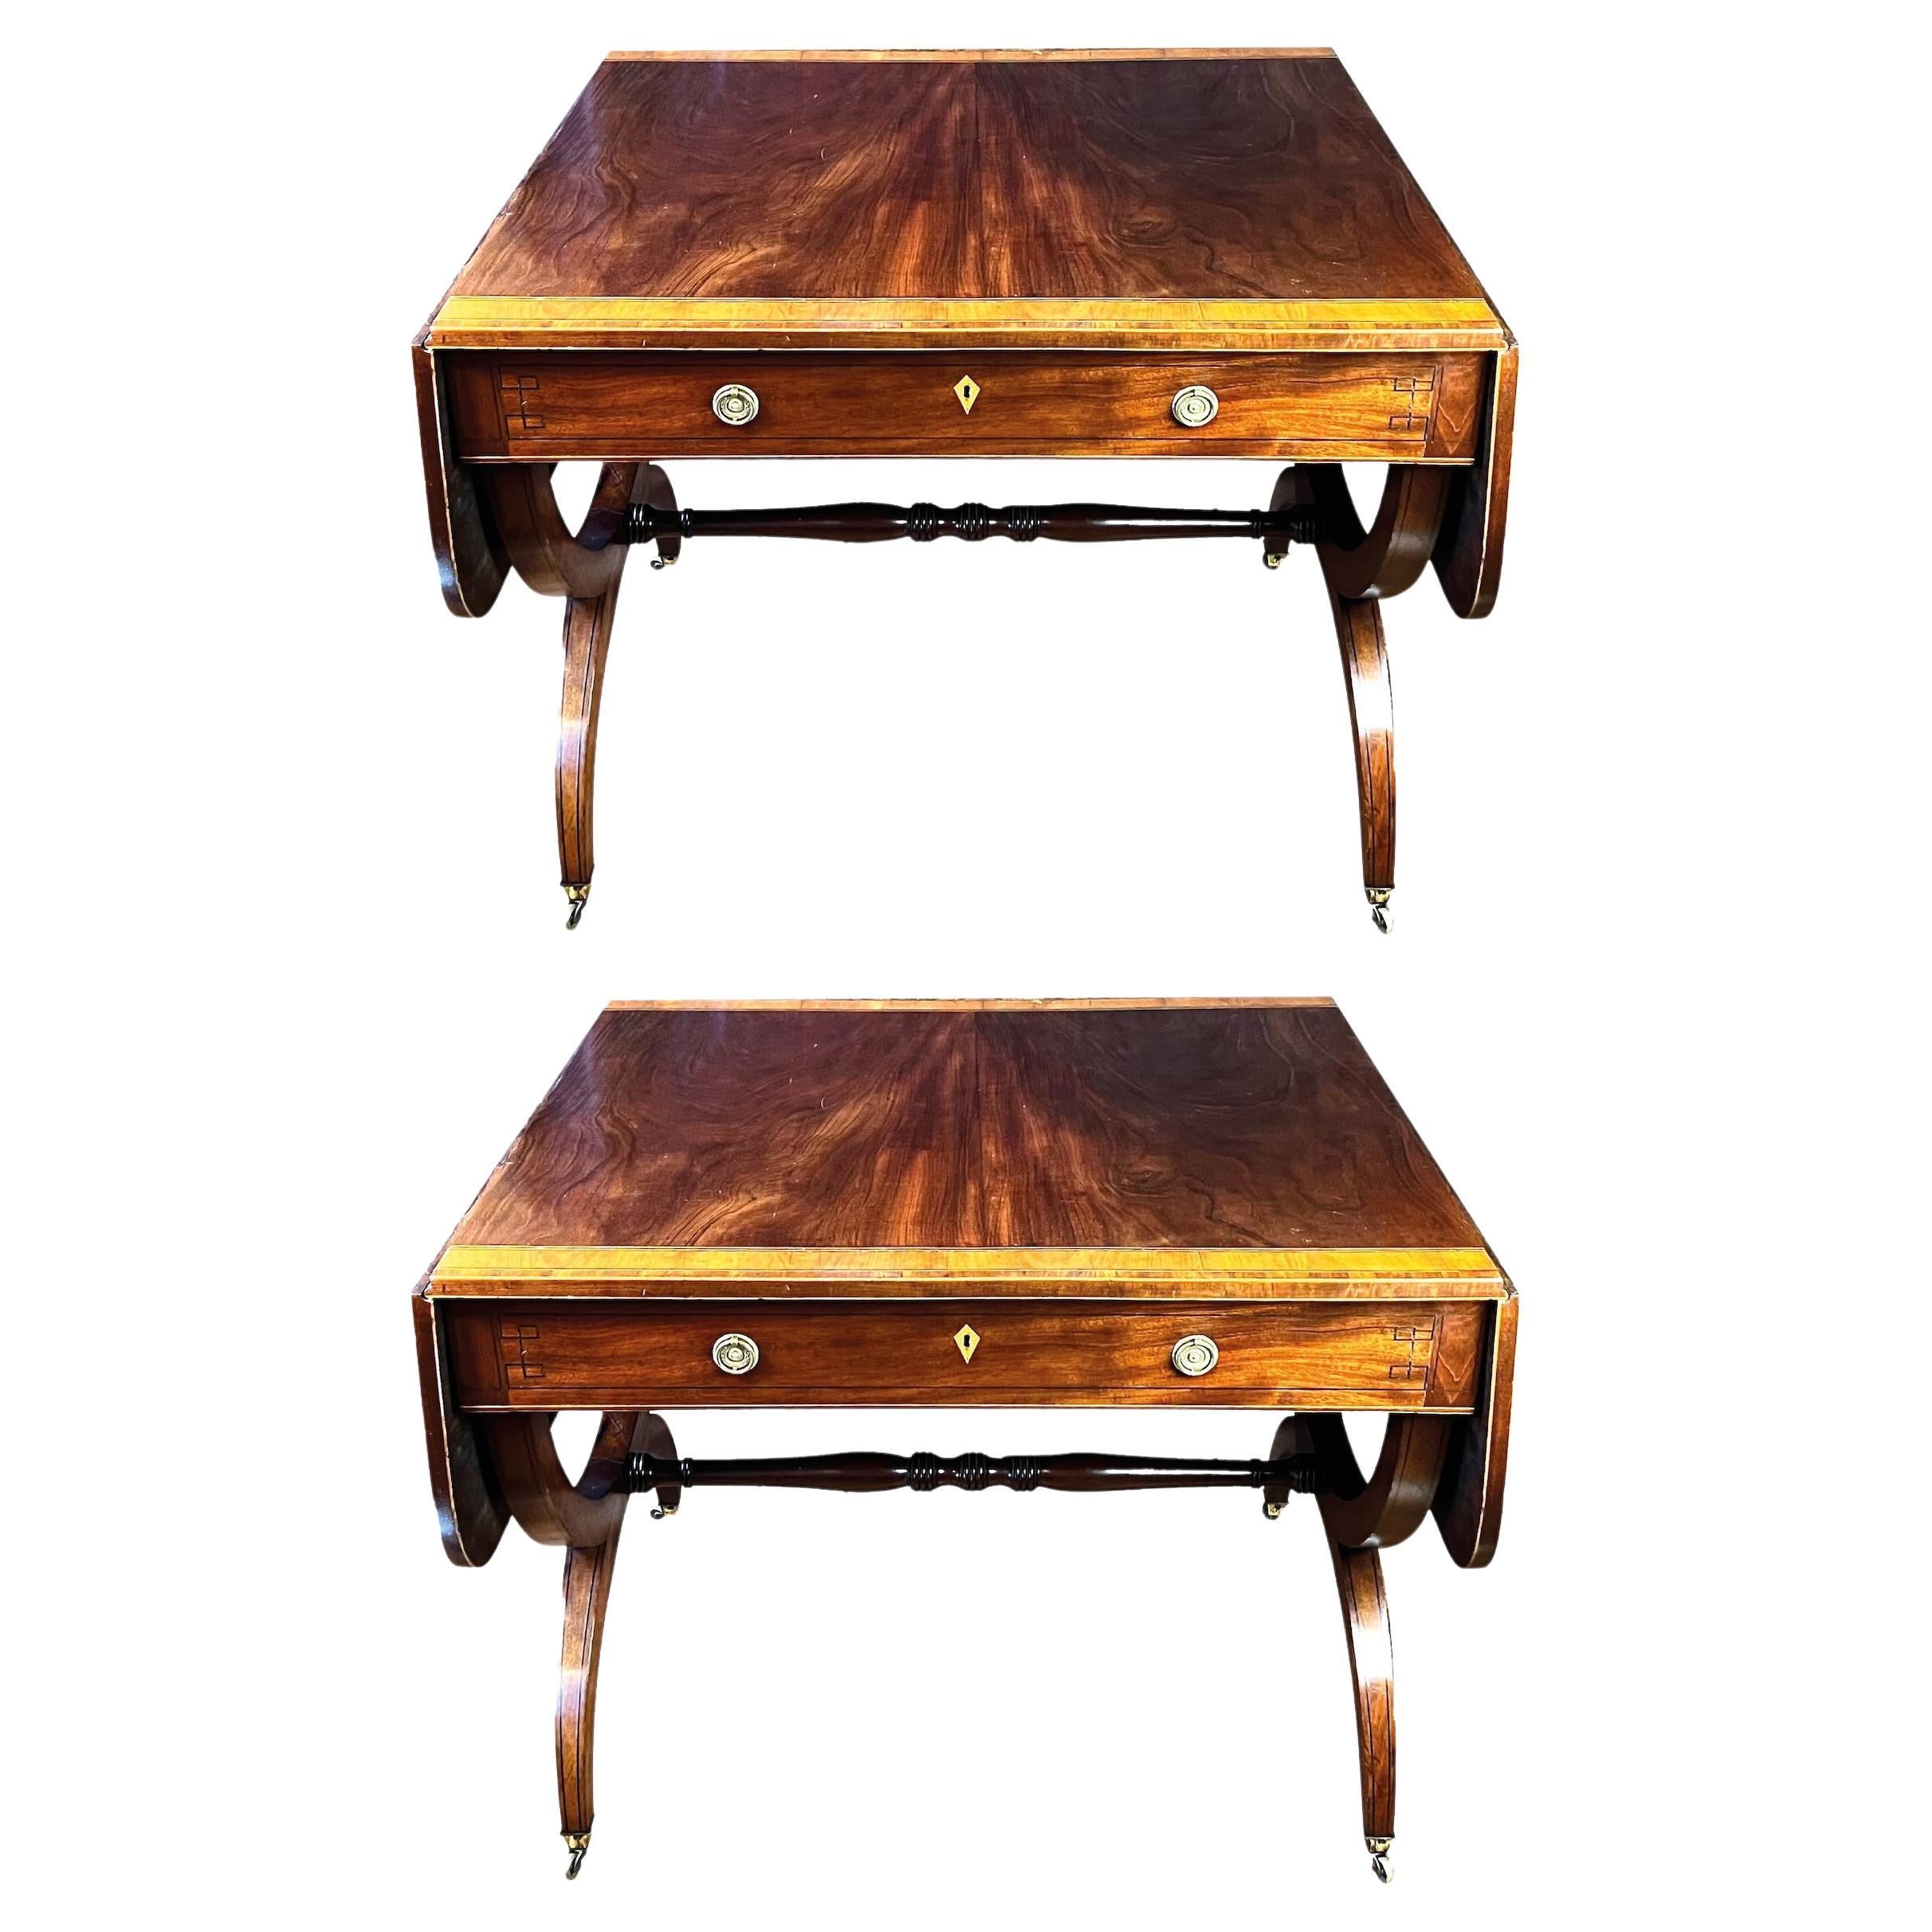 A Fine Pair Of Regency Mahogany & Satinwood-Inlaid Sofa Tables For Sale